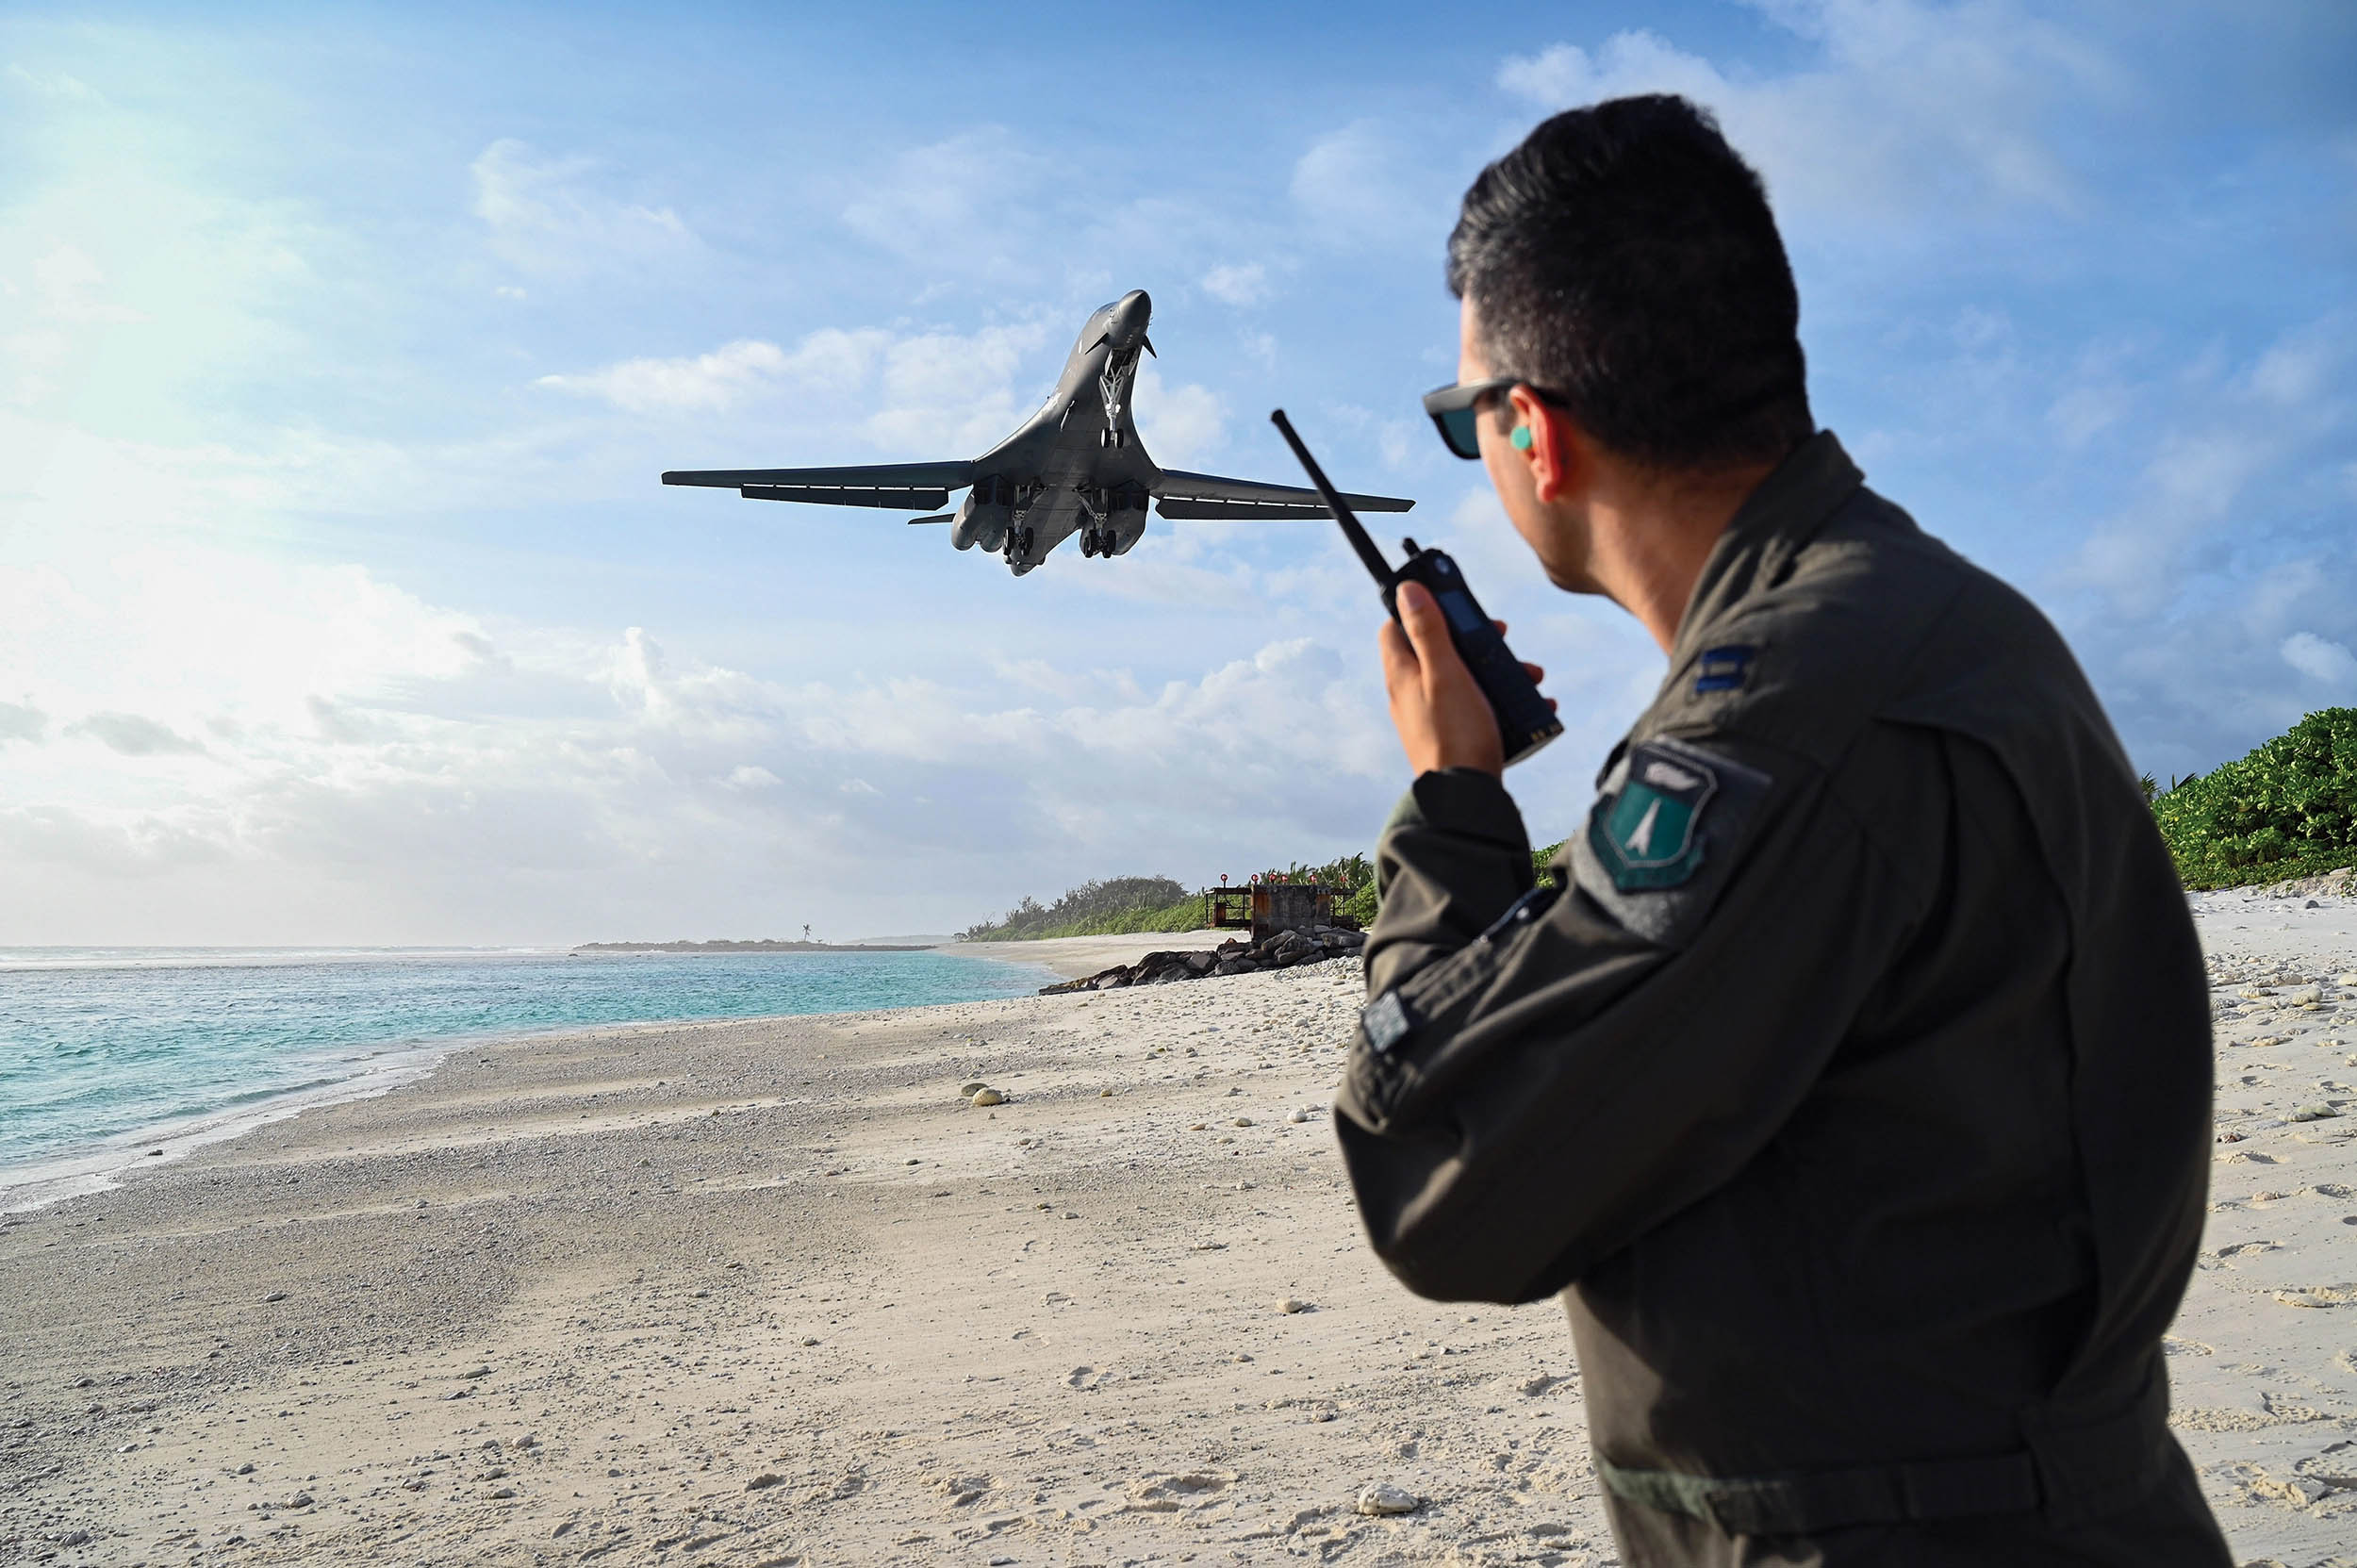 Air Force Captain Orr “Recoil” Genish, 37th Bomb Squadron weapons systems officer, uses land mobile radio as he watches B-1B Lancer land in support of Bomber Task Force mission at Naval Support Facility Diego Garcia, October 17, 2021 (U.S. Air Force/Hannah Malone)